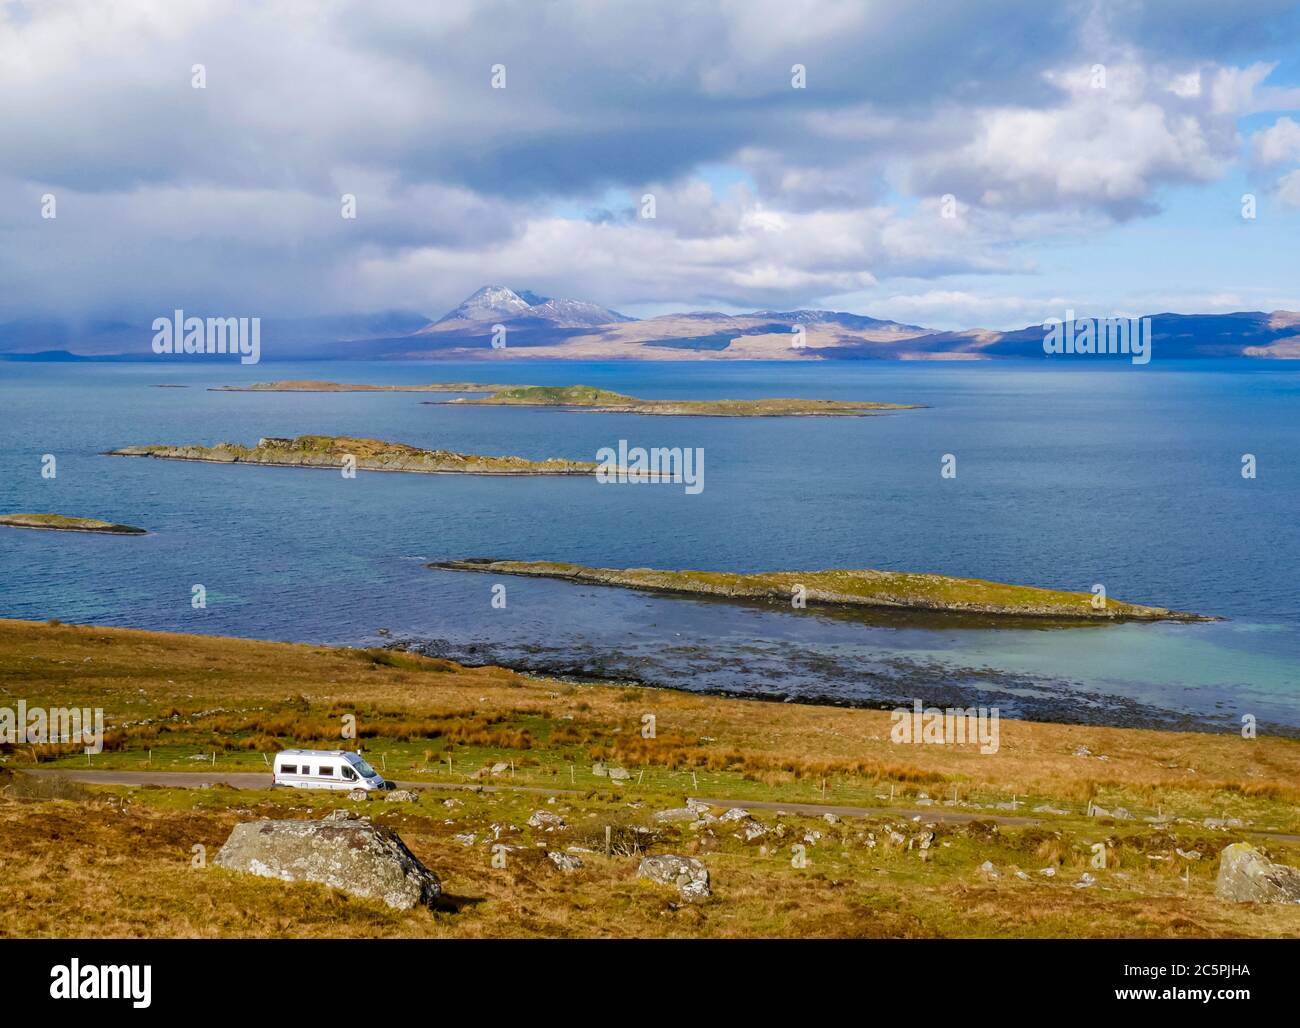 View from hill looking towards Paps of Isle of Jura with campervan parked below, Argyll, Scotland, UK Stock Photo